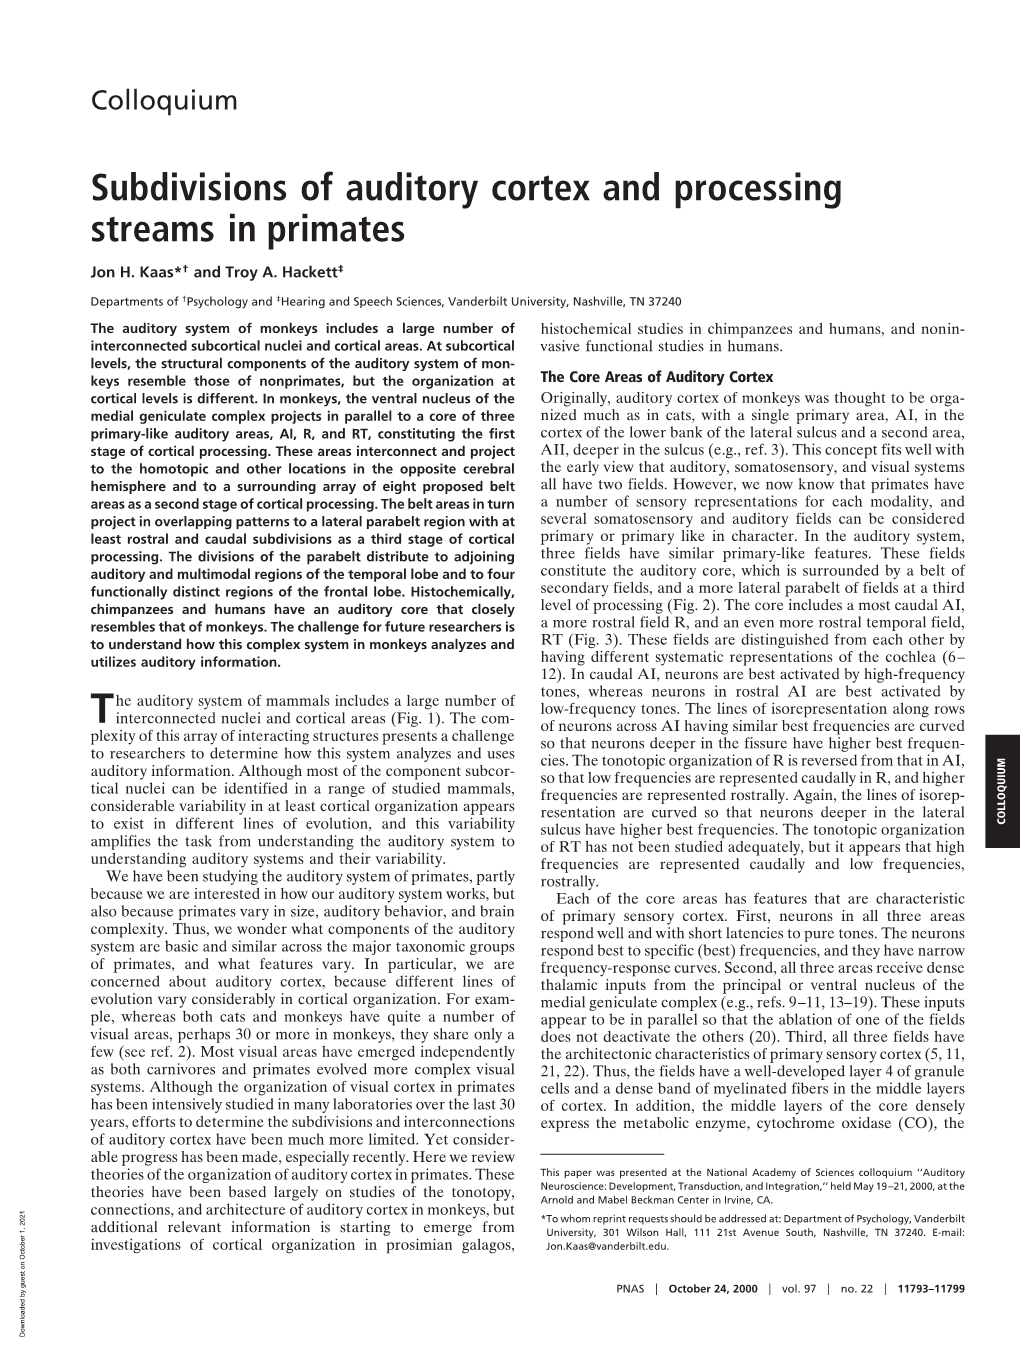 Subdivisions of Auditory Cortex and Processing Streams in Primates